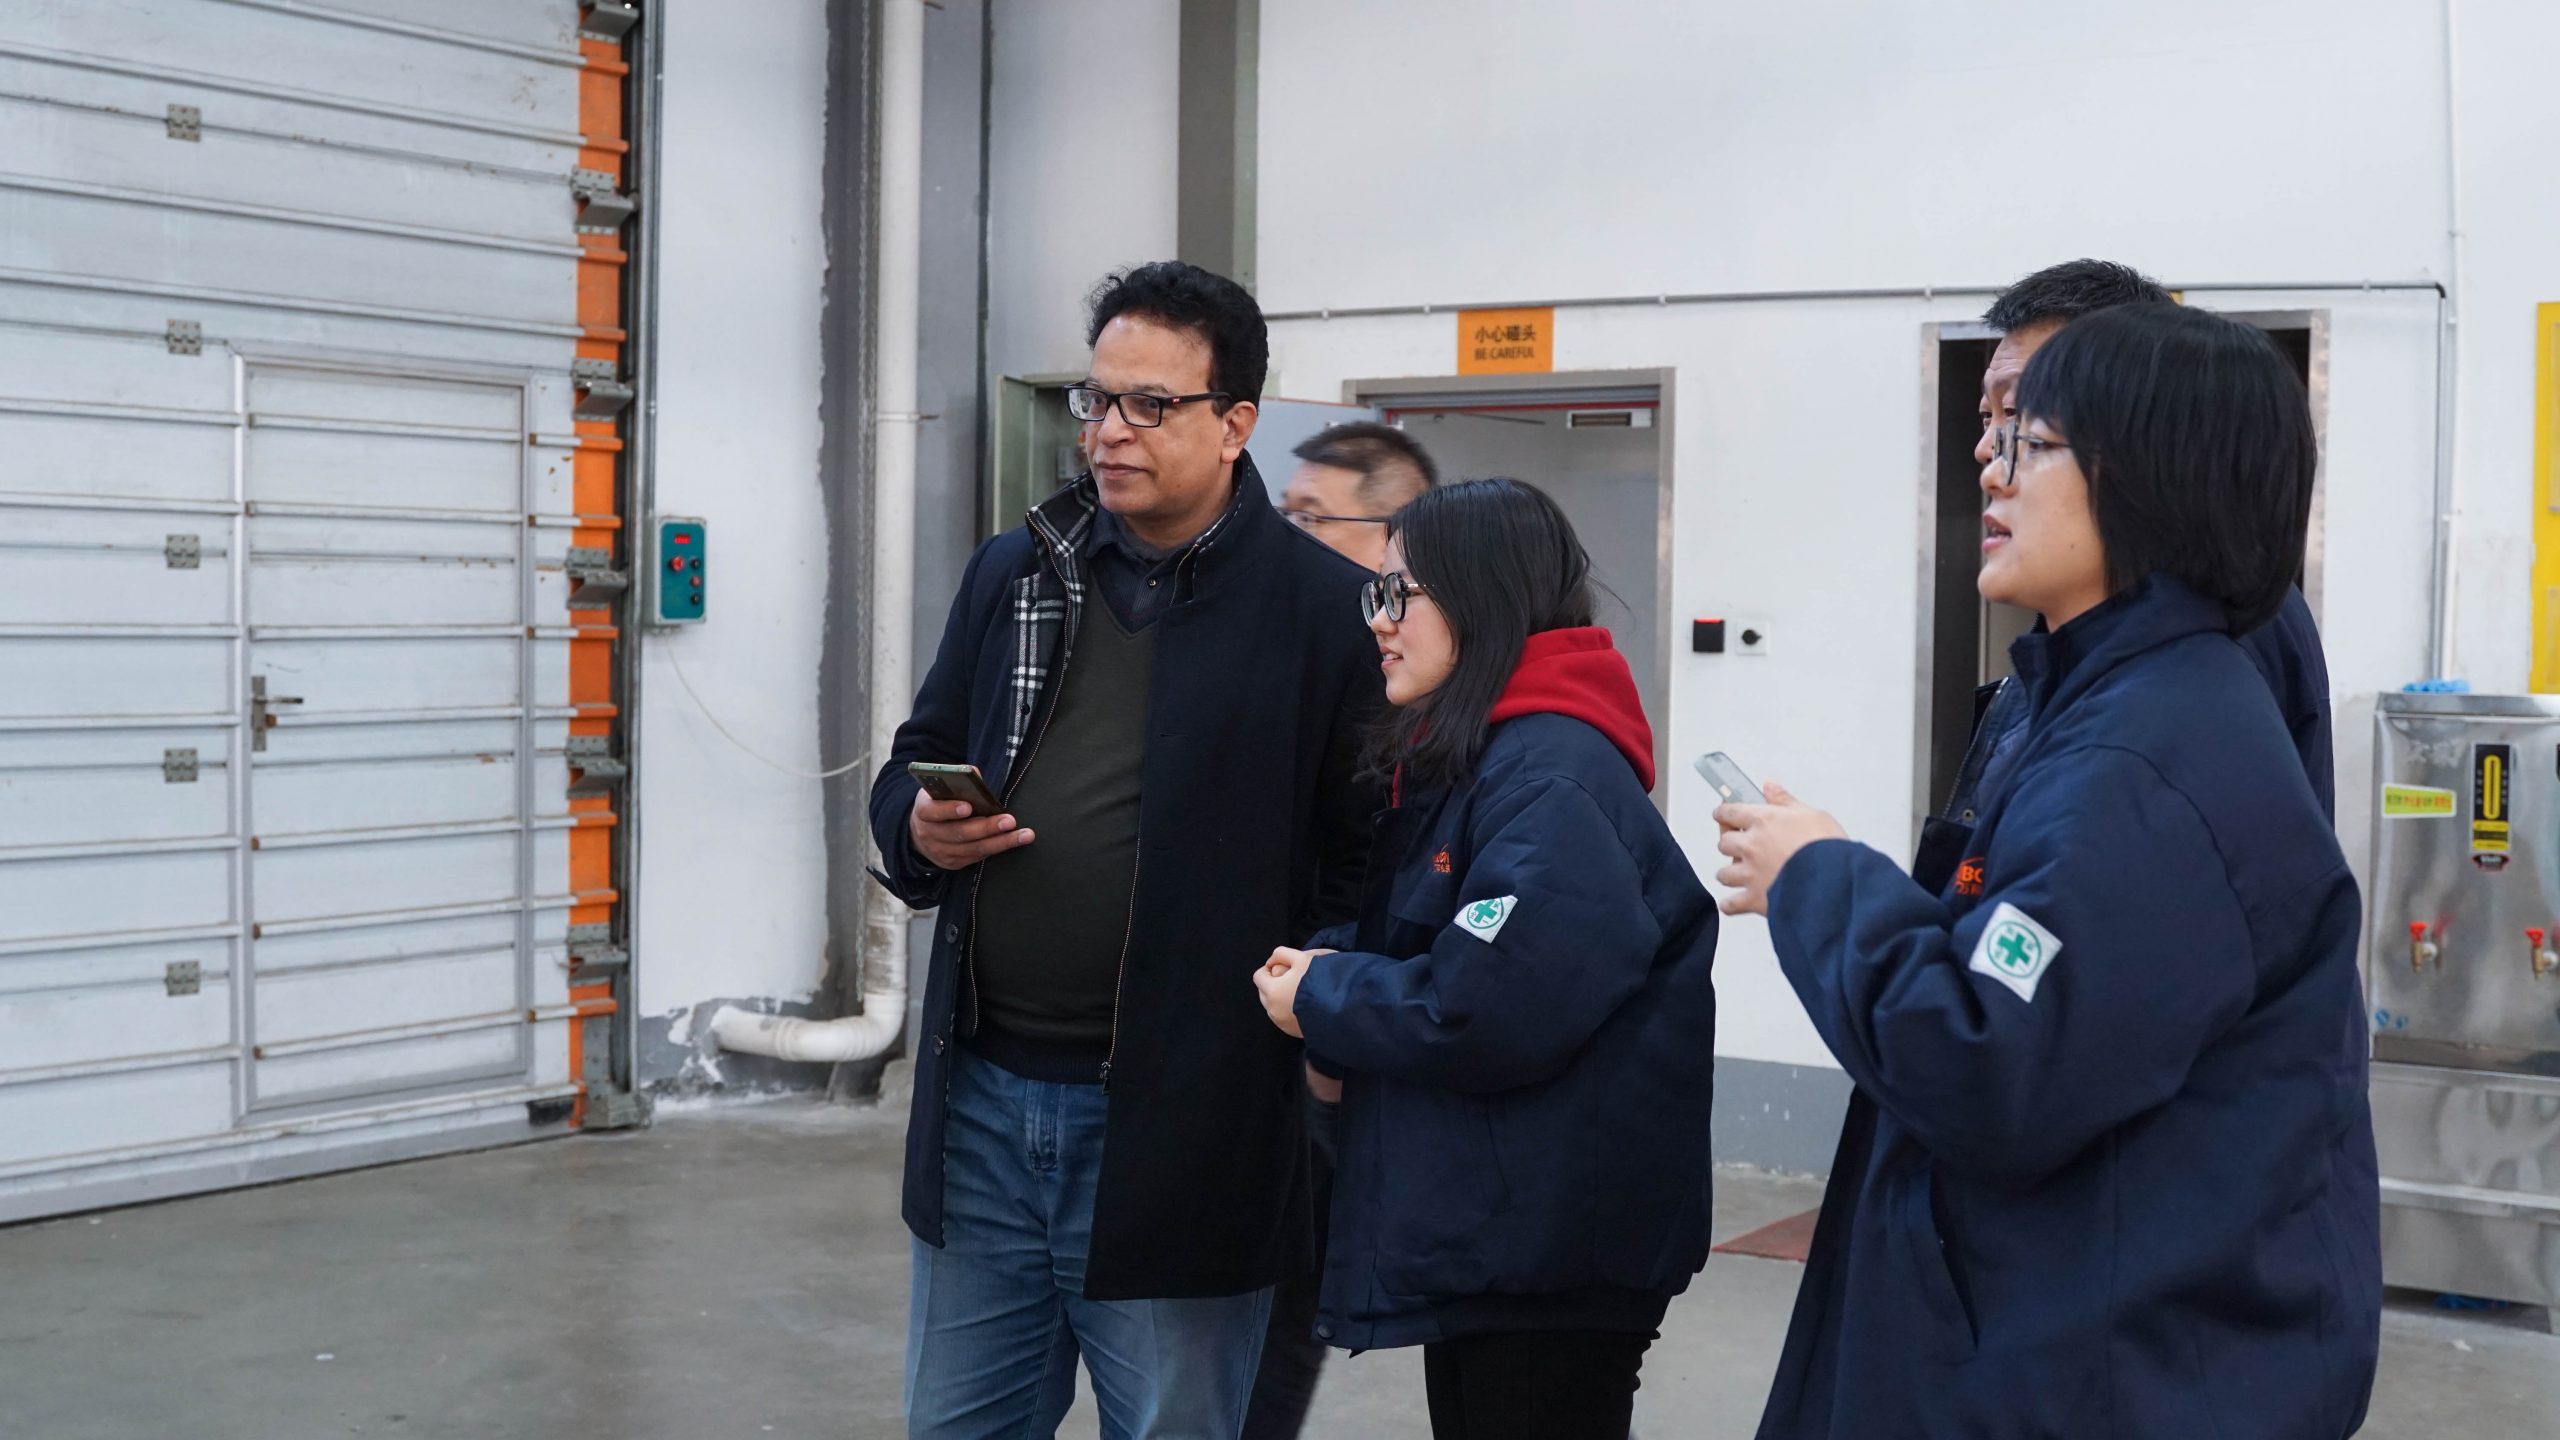 Egyptian customers came to visit Wanbon factory